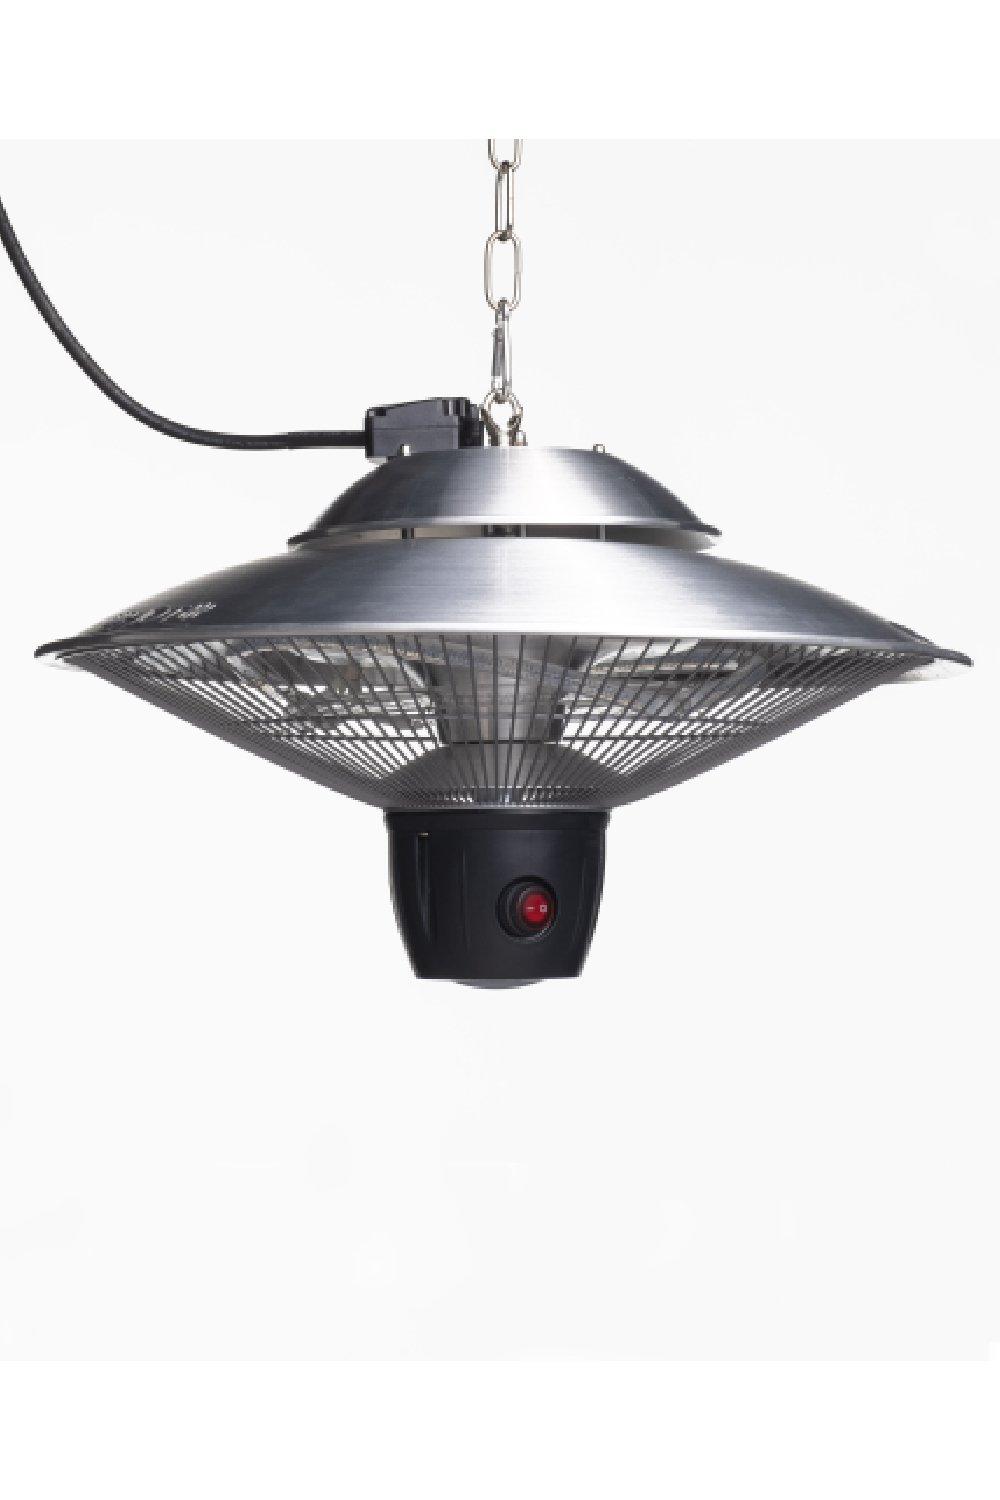 Lyon 1500w Ceiling Mounted Outdoor Electric Patio Heater